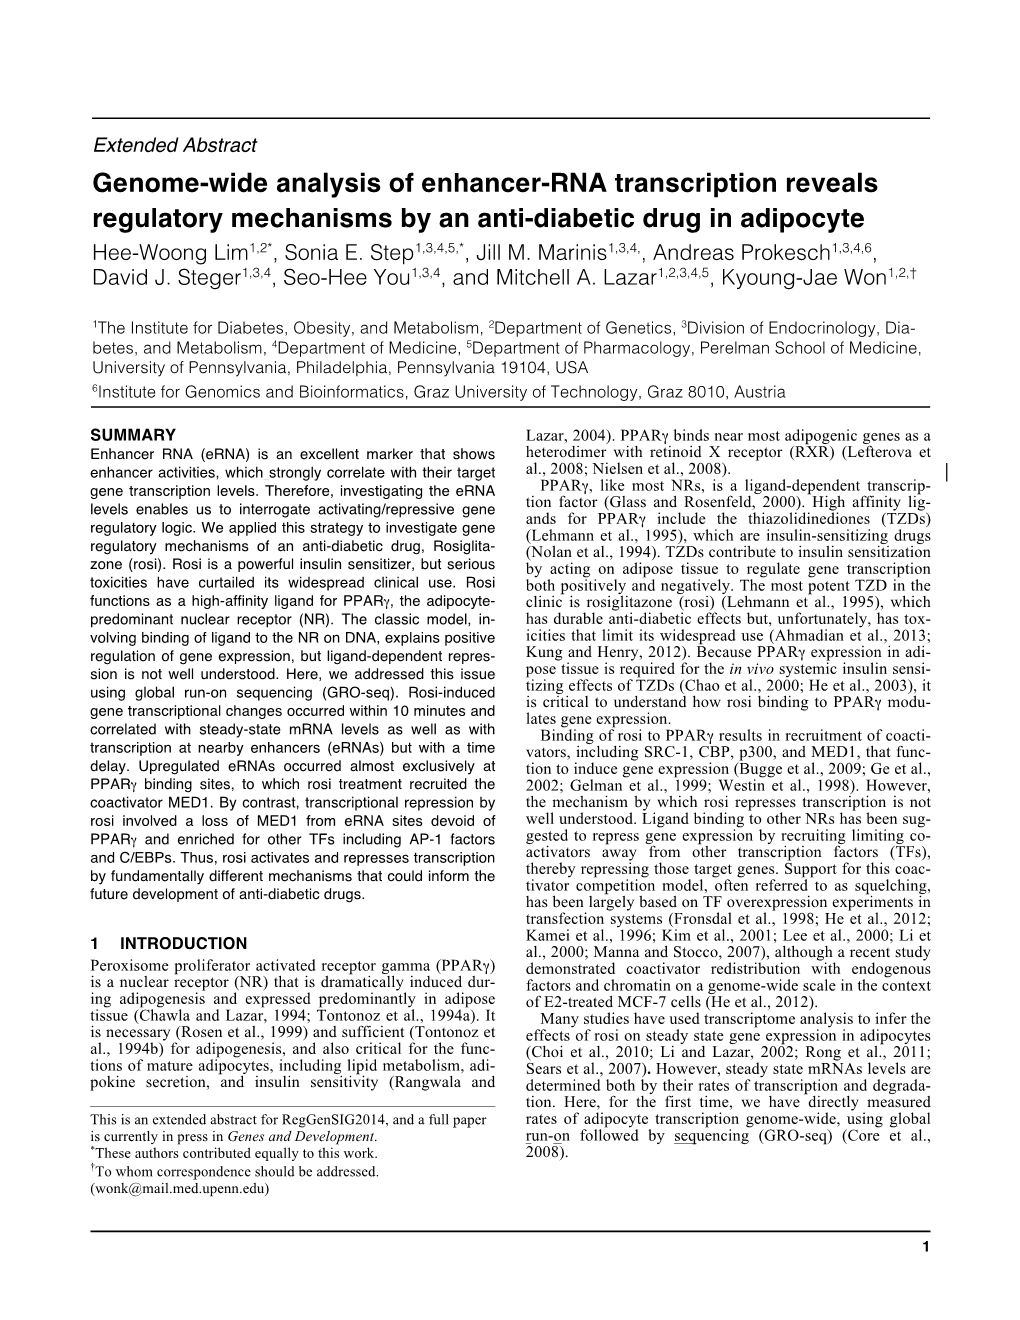 Genome-Wide Analysis of Enhancer-RNA Transcription Reveals Regulatory Mechanisms by an Anti-Diabetic Drug in Adipocyte Hee-Woong Lim1,2*, Sonia E